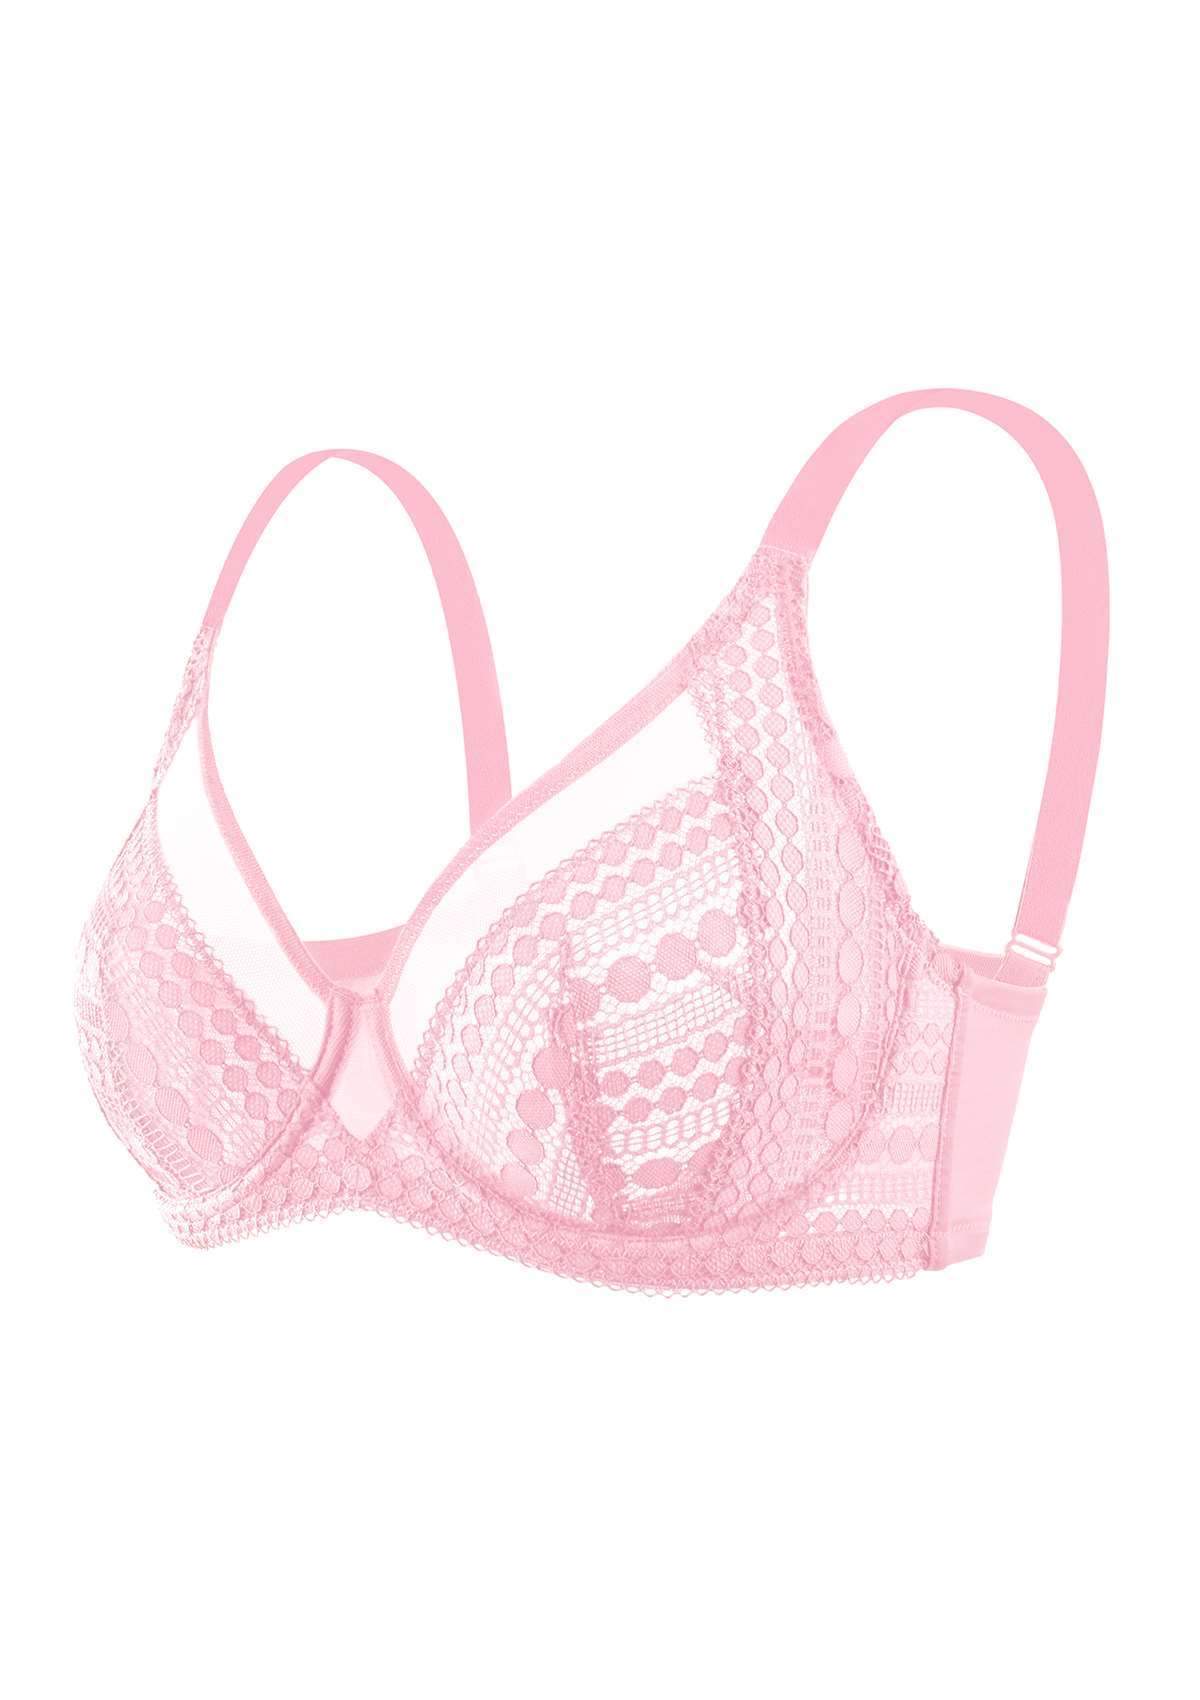 HSIA Heroine Lace Bra And Panties Set: Most Comfortable Supportive Bra - Pink / 44 / DD/E